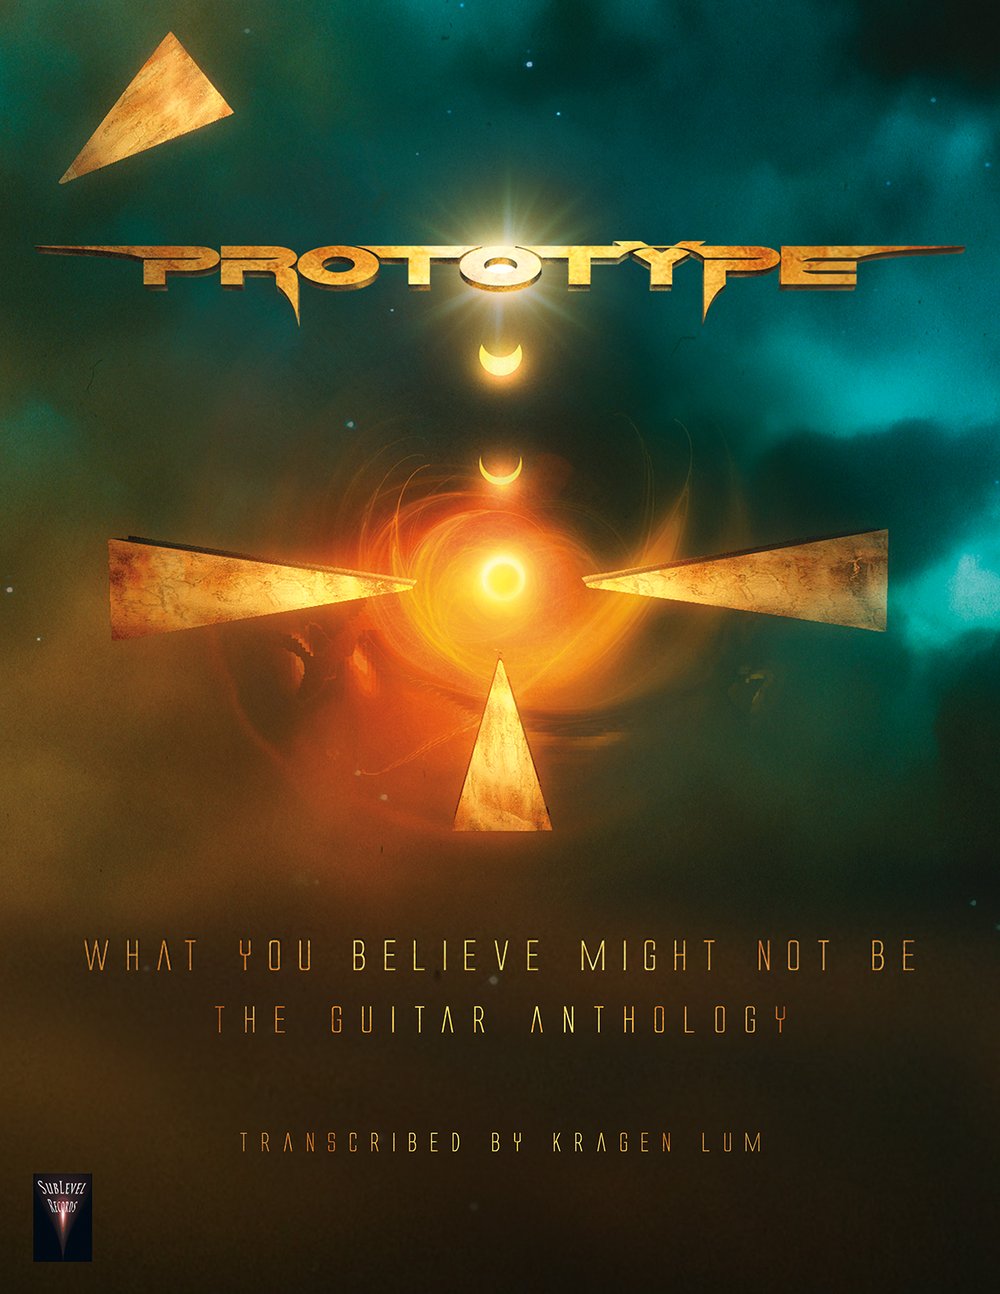 Prototype - What You Believe Might Not Be: The Guitar Anthology (eBook Edition + GP Files)